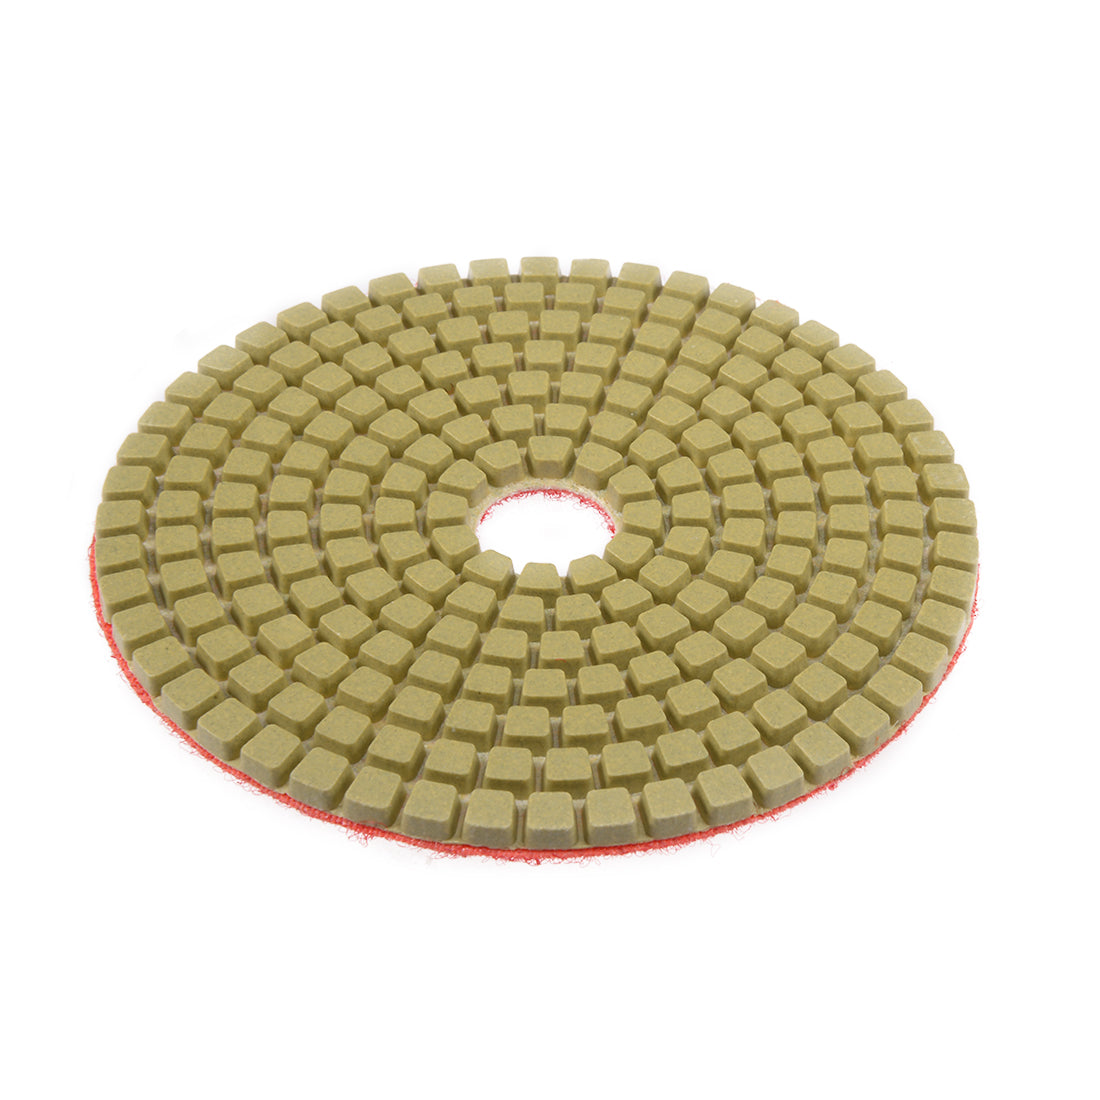 uxcell Uxcell Diamond Polishing Sanding Grinding Pads Discs 4 Inch Grit 500 10 Pcs for Granite Concrete Stone Marble